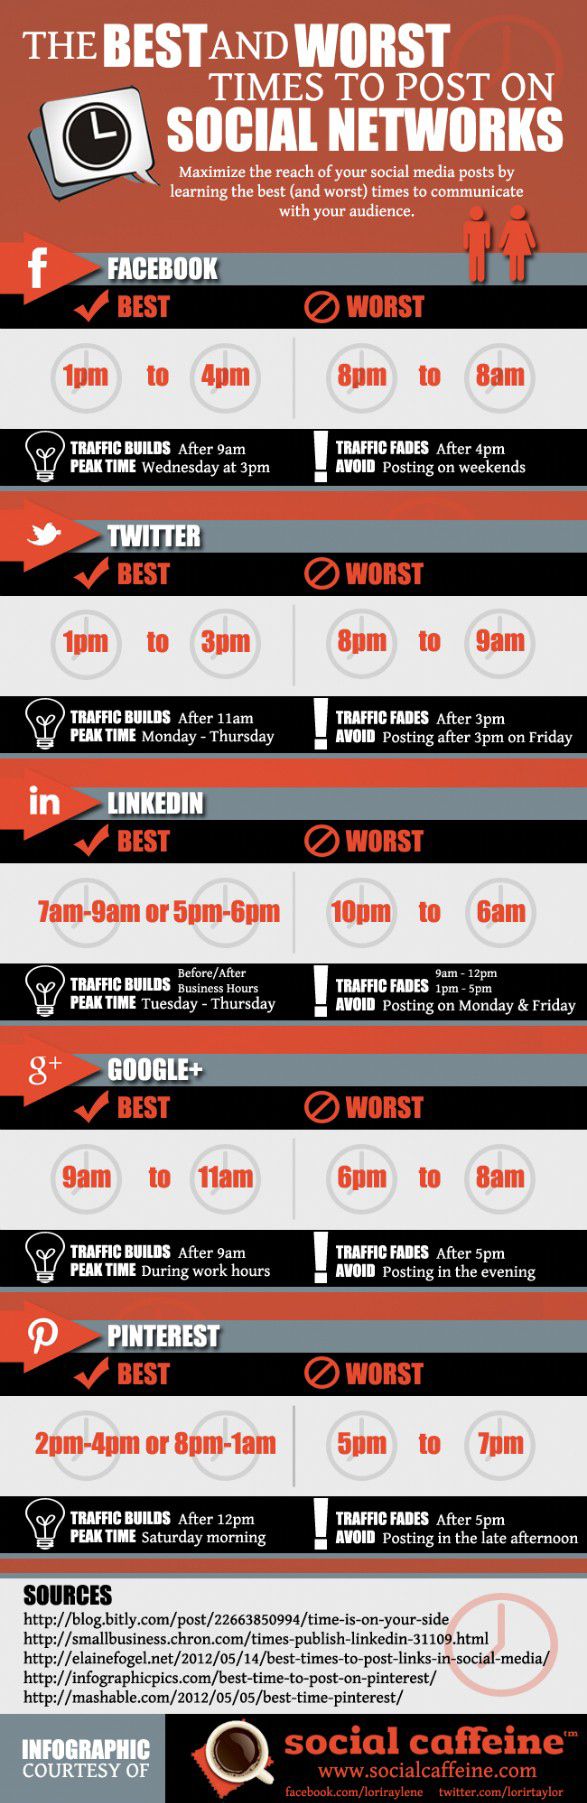 The Best and Worst times to post on social networks